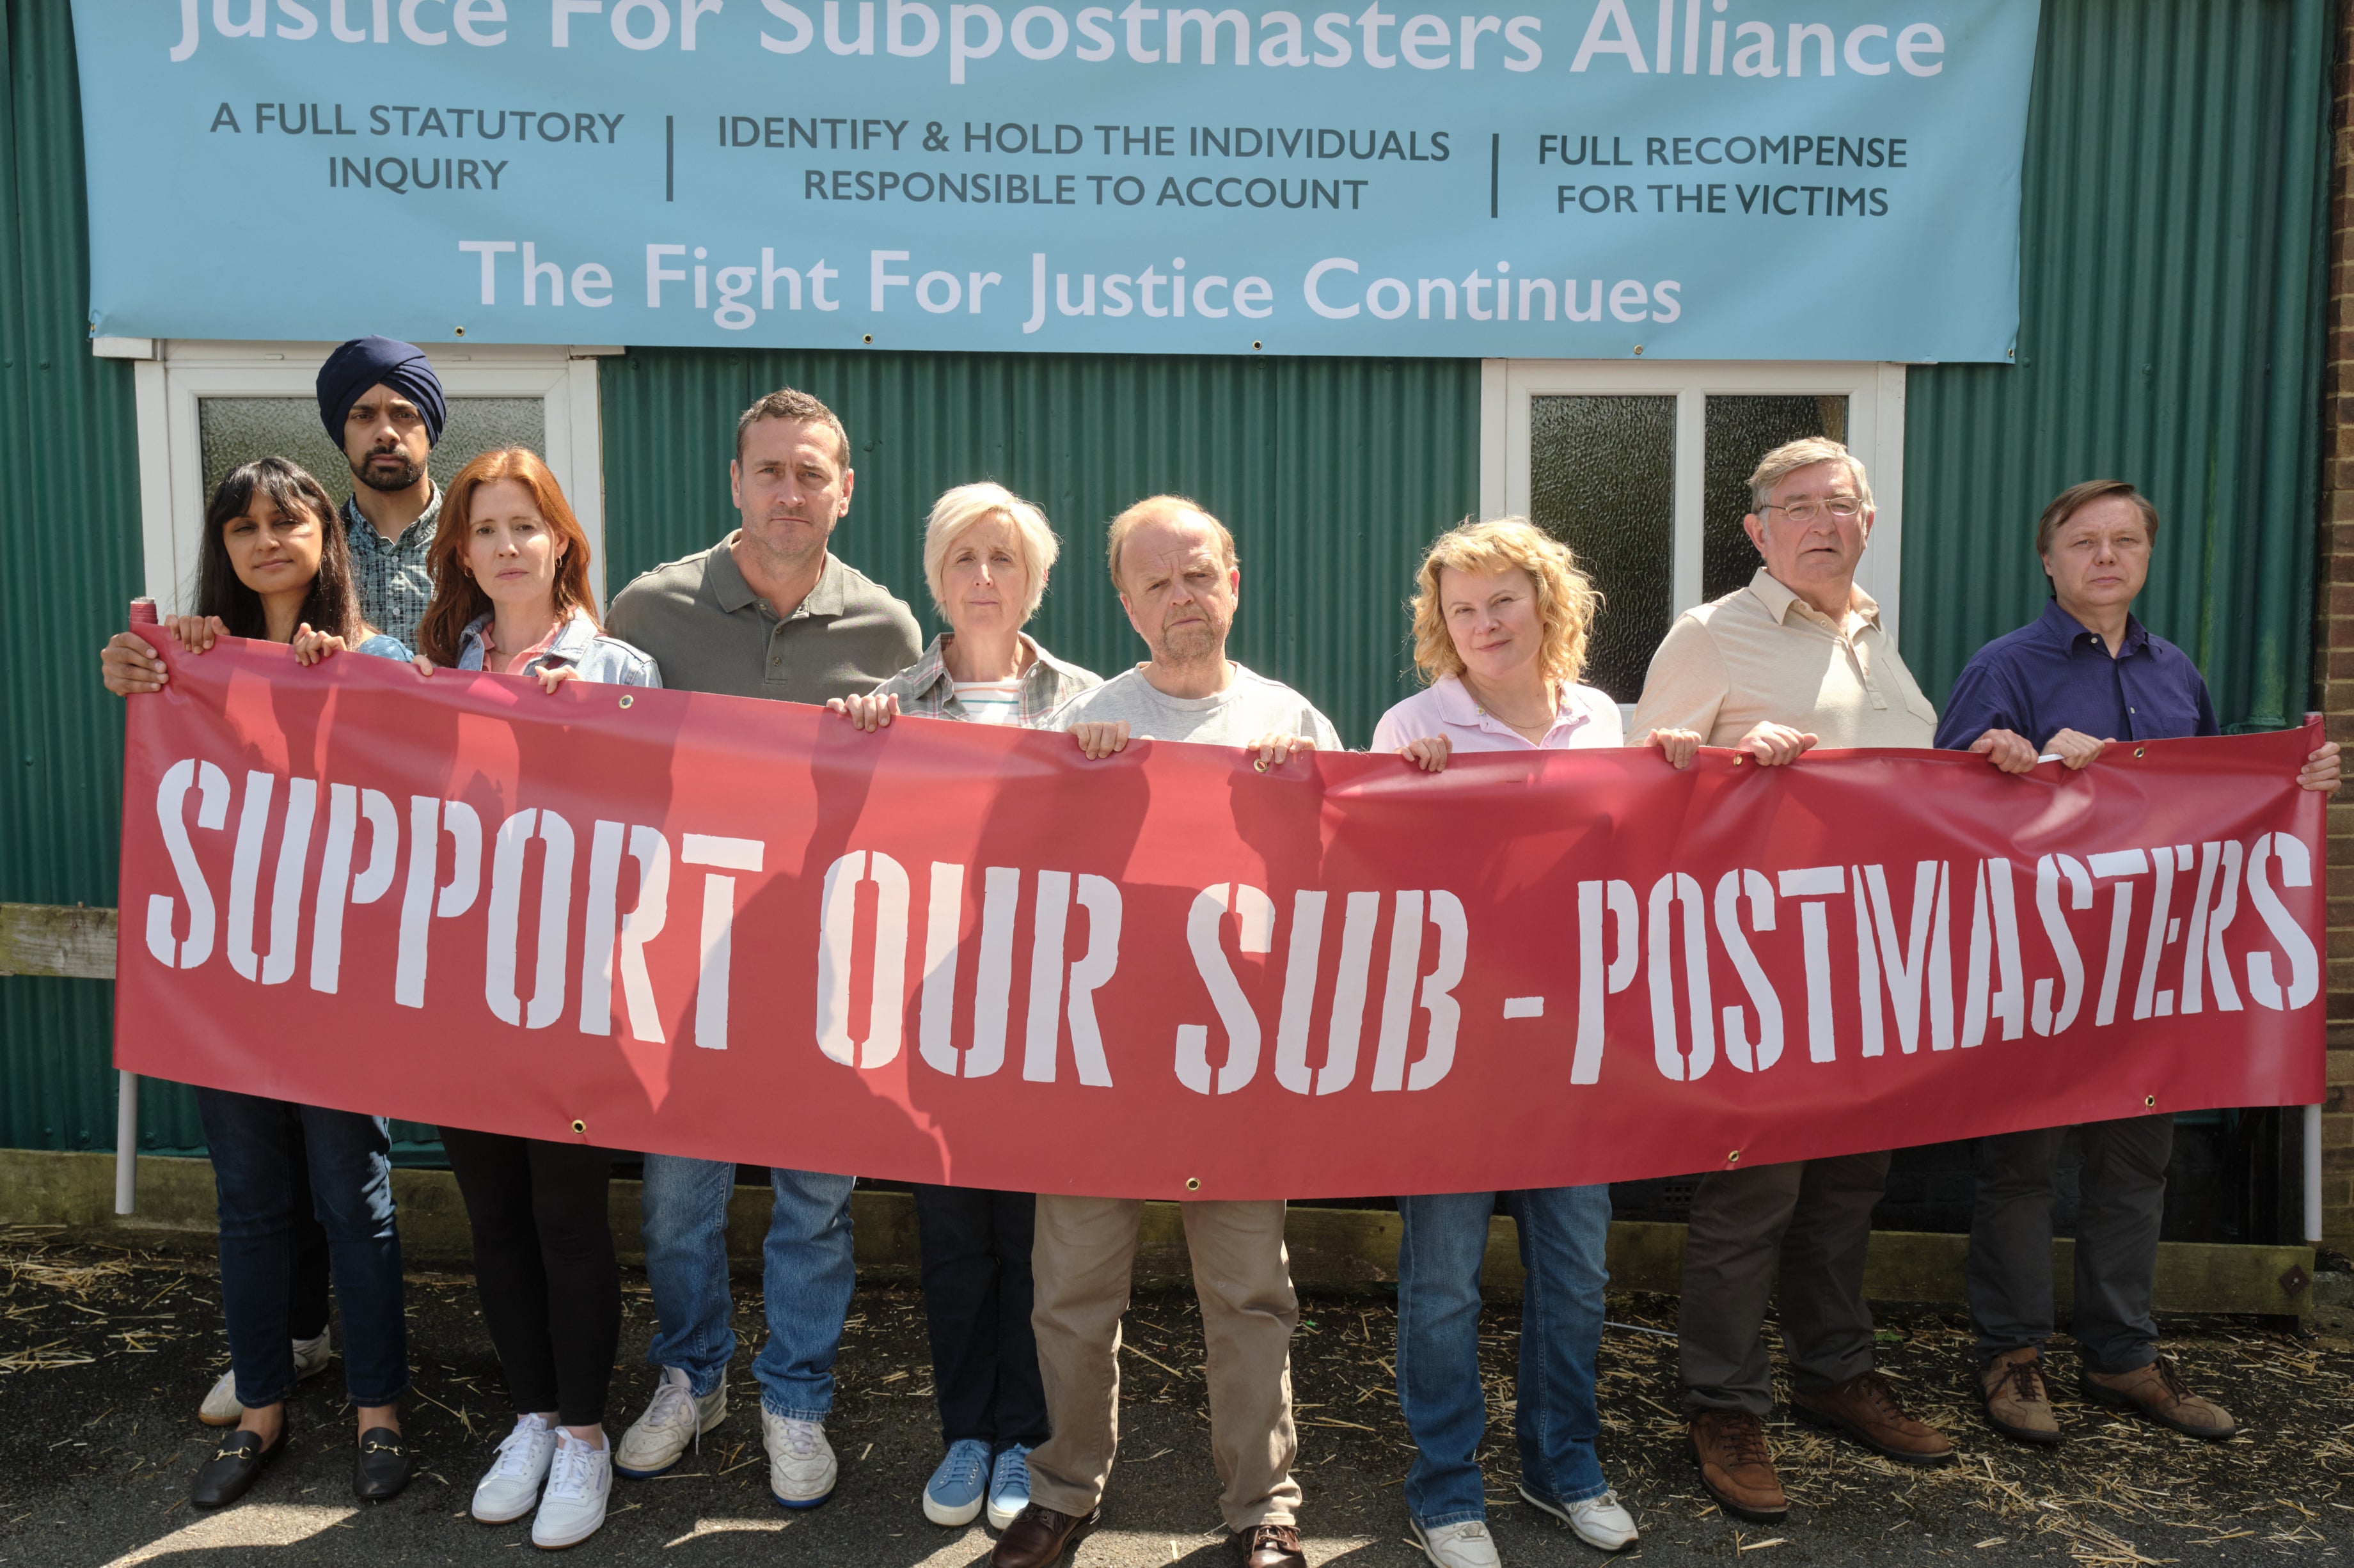 Alan Bates added that he was not yet celebrating as he and over 1,000 others wrongly accused postmasters are yet to receive their full and final compensation